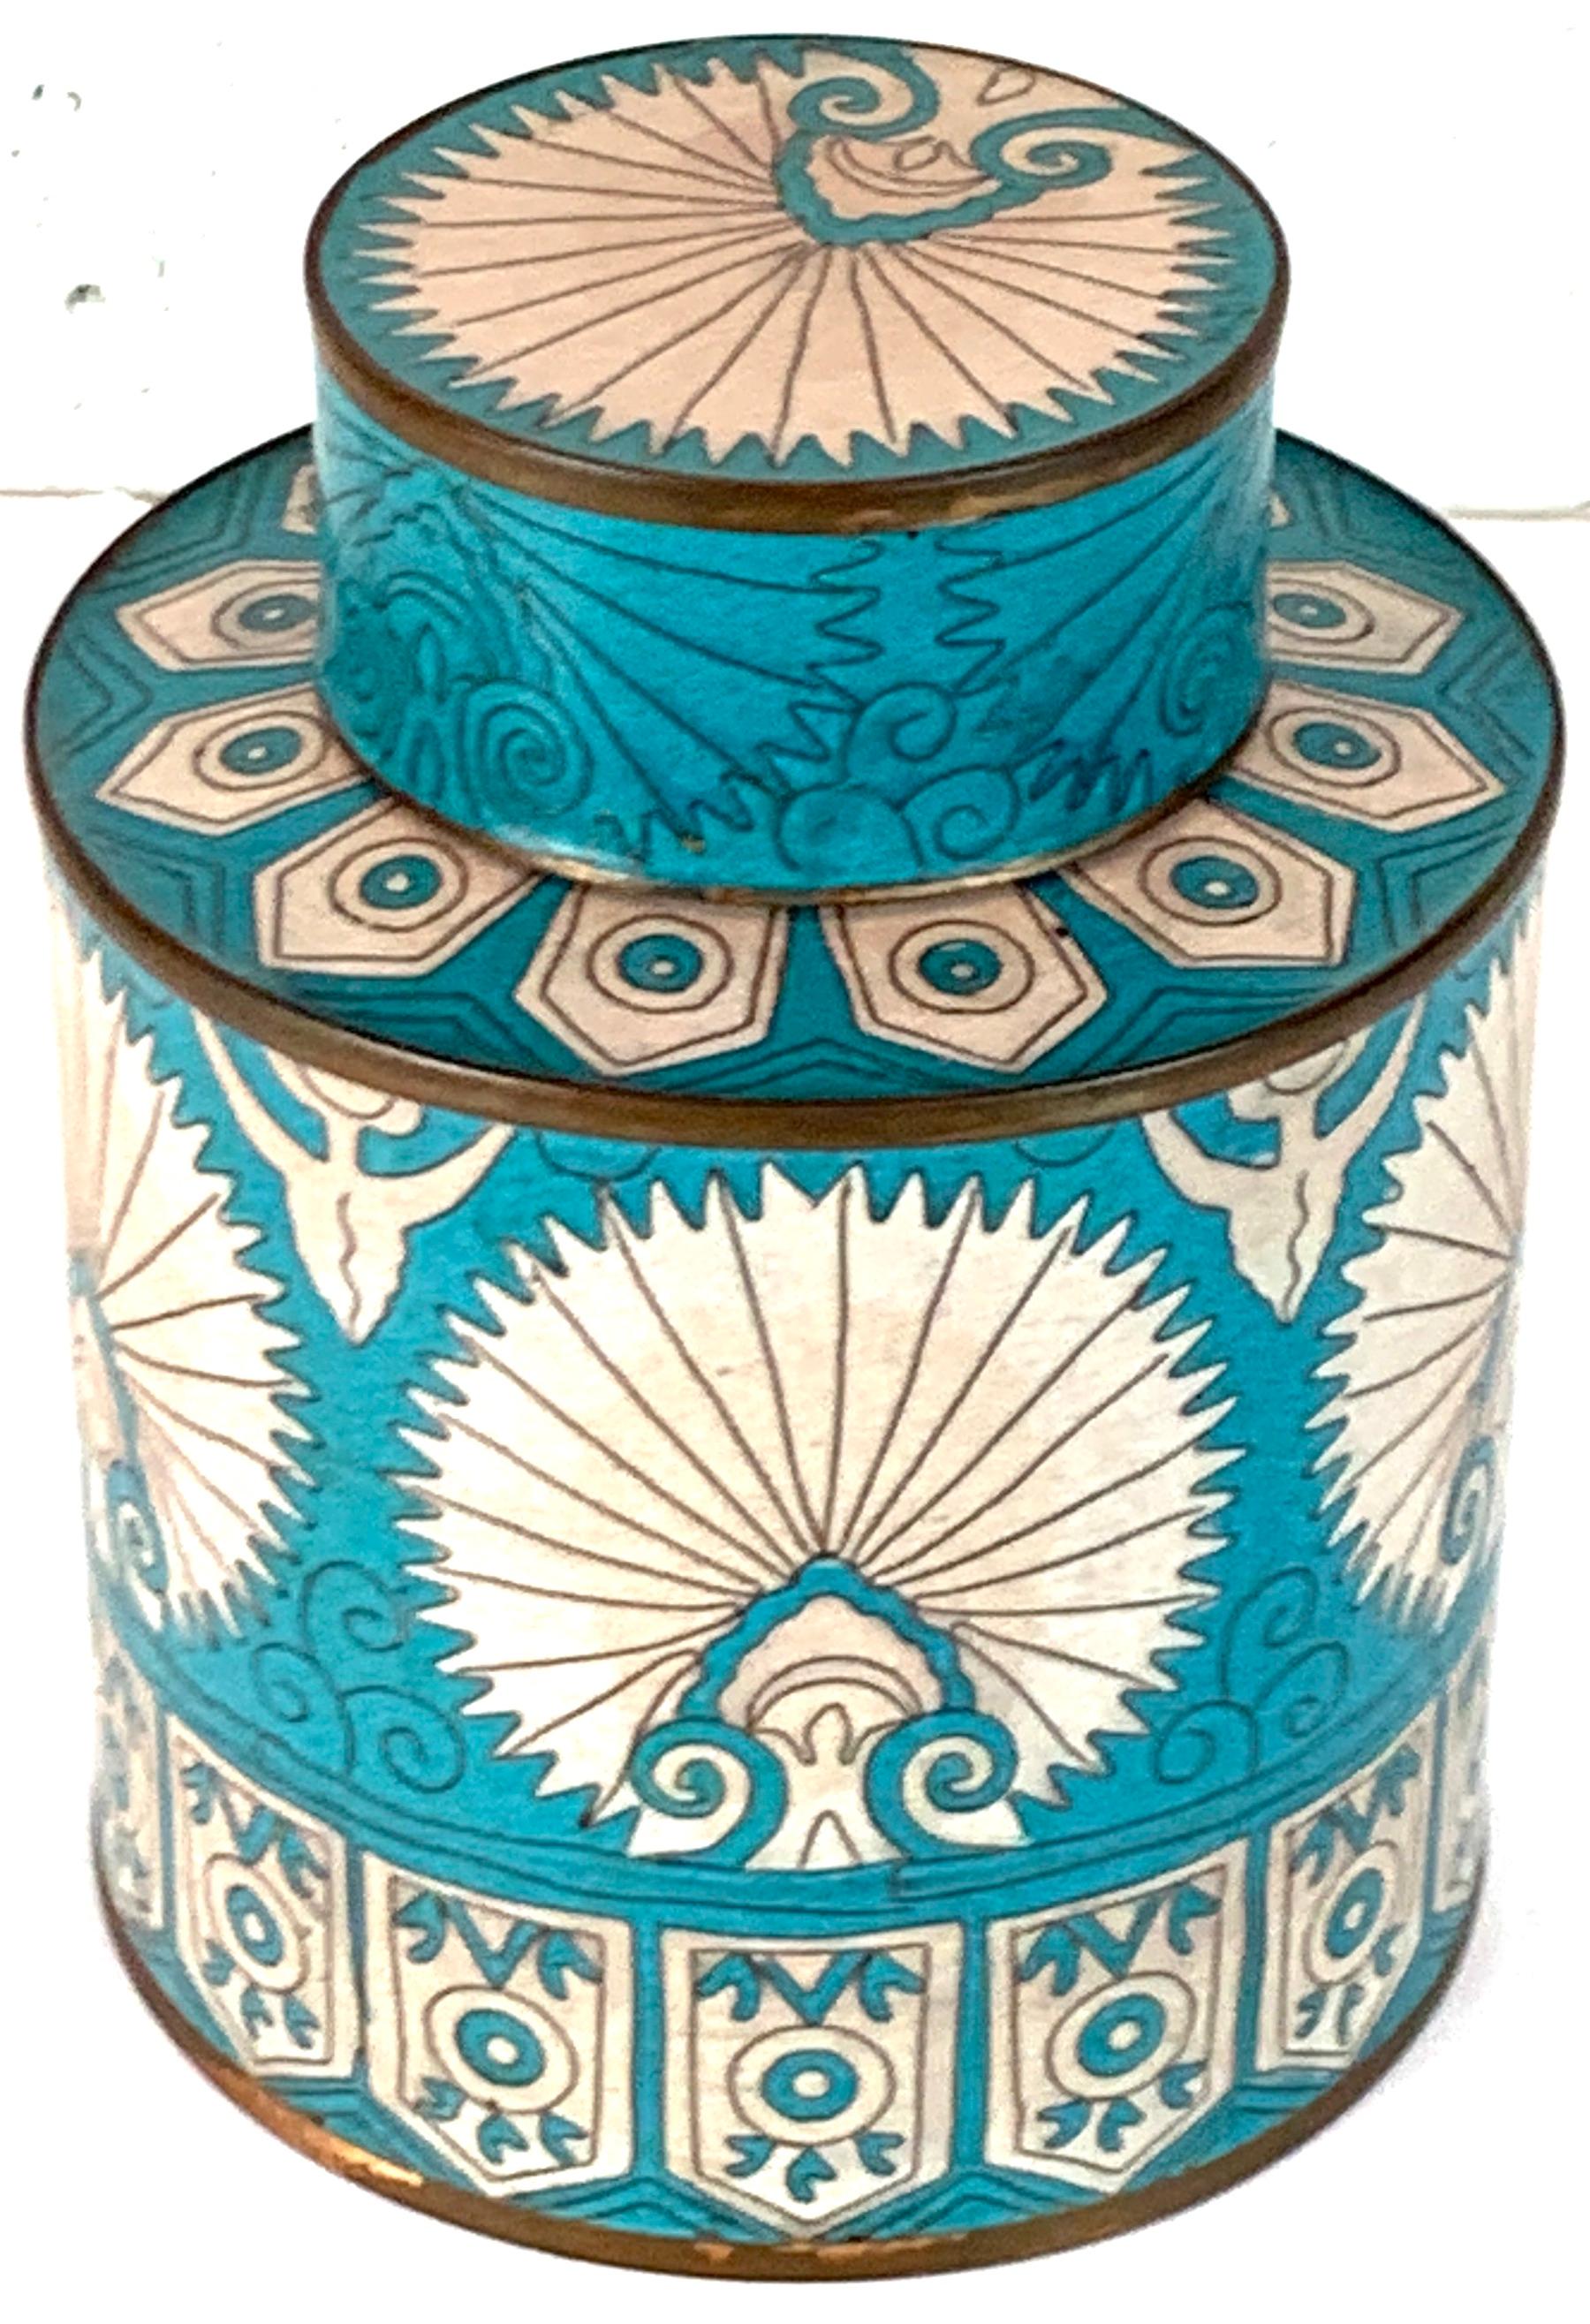 Fabienne Jouvin blue and white shell motif Cloisonné Ginger jar, circa 1980, With removable lid, and intentional aged patina of the Cloisonné. Stamped 'Fabienne Jouvin-Paris'.